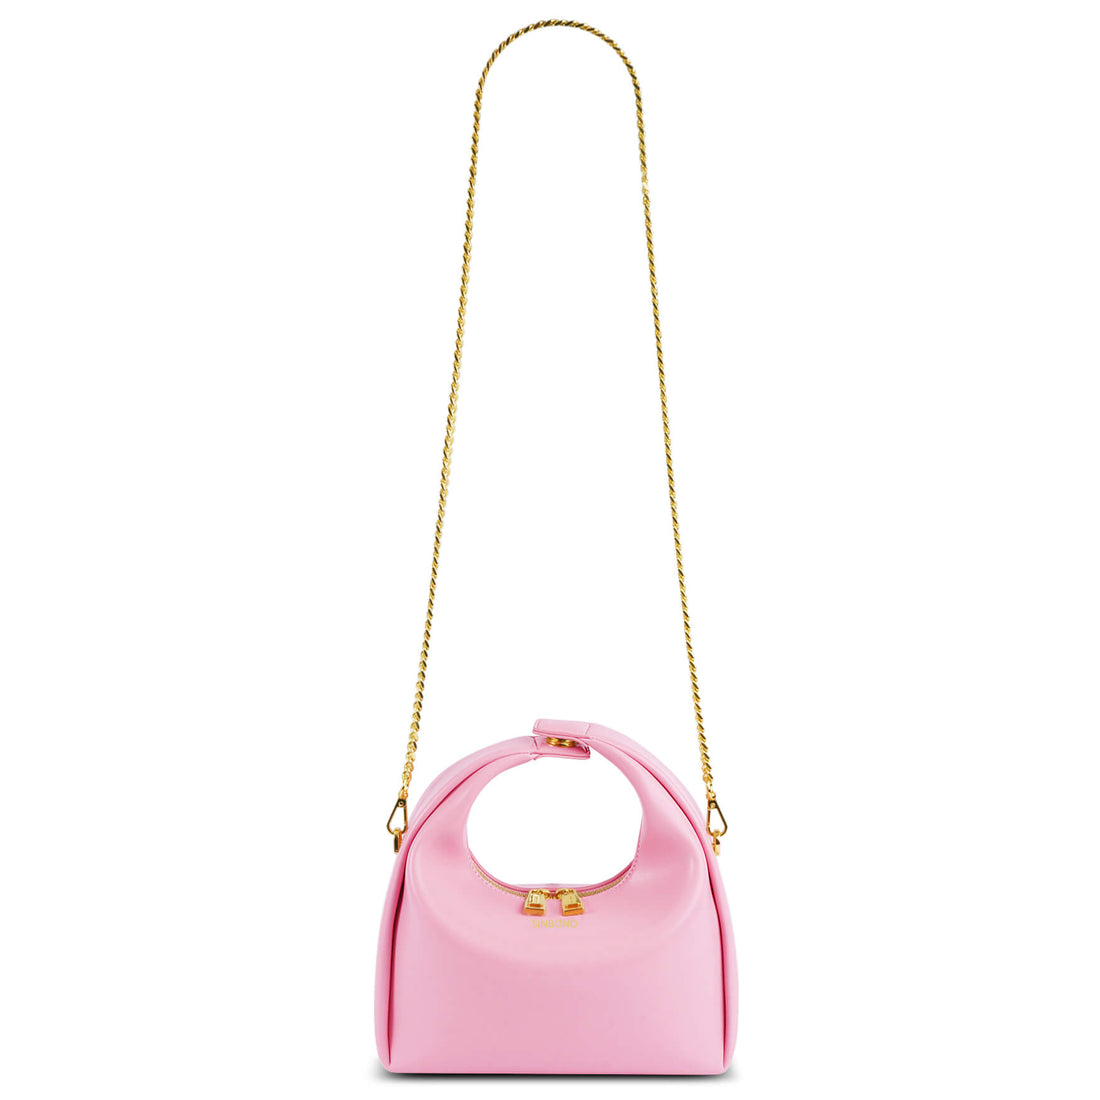 SINBONO Classic Pink Color Women 's Crossbody Purse come with Golden Strap and Handle 